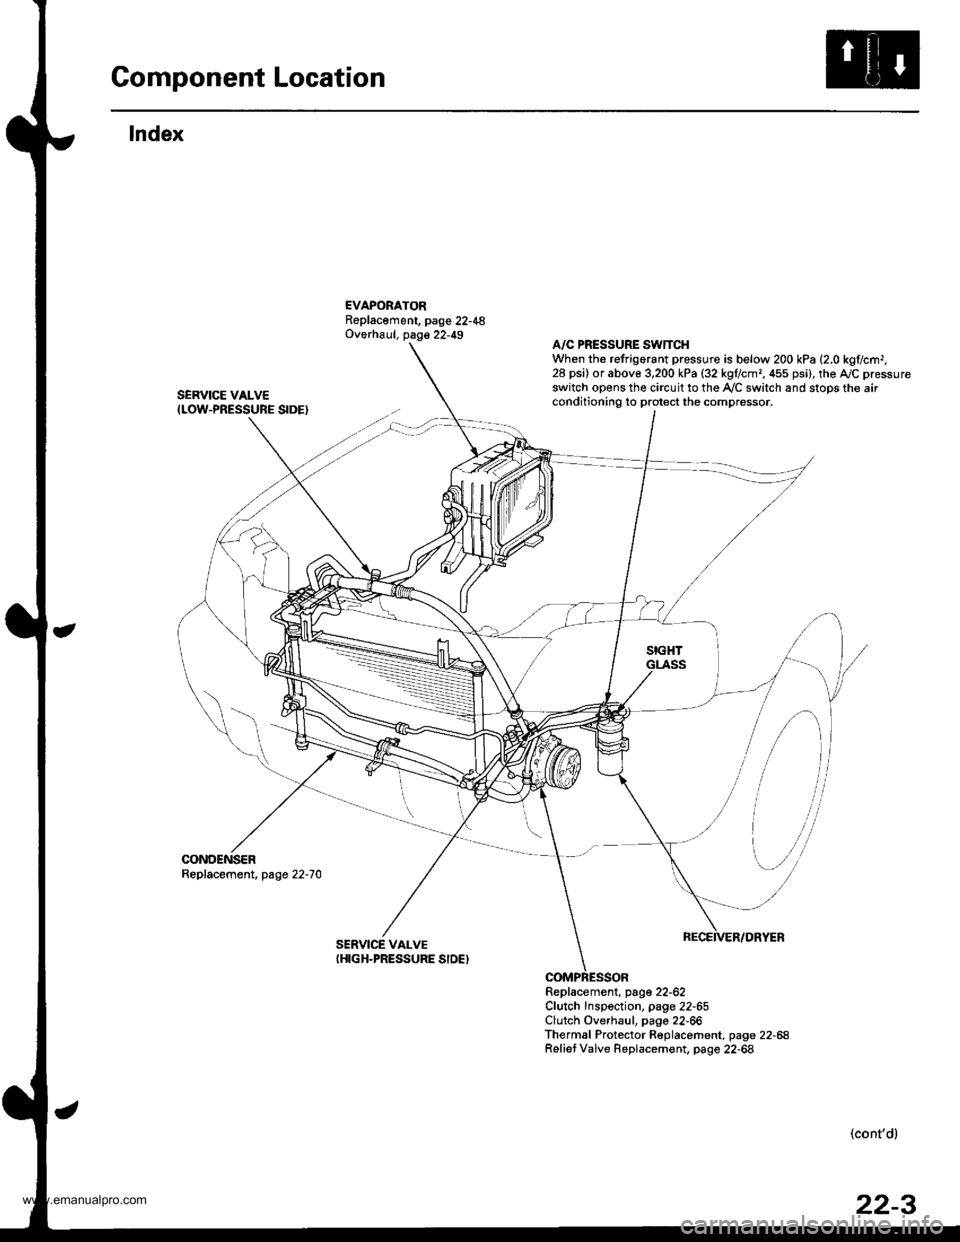 HONDA CR-V 1999 RD1-RD3 / 1.G Workshop Manual 
Component Location
lndex
EVAPORATORReplacement, page 22-48Overhaul, page 22-49
SERVICE VALVEILOW-PRESSURE SIDE}
CONDENSERReplacement, page 22-70
A/C PRESSURE SWTTCHWhen the refrigorant pressure is be